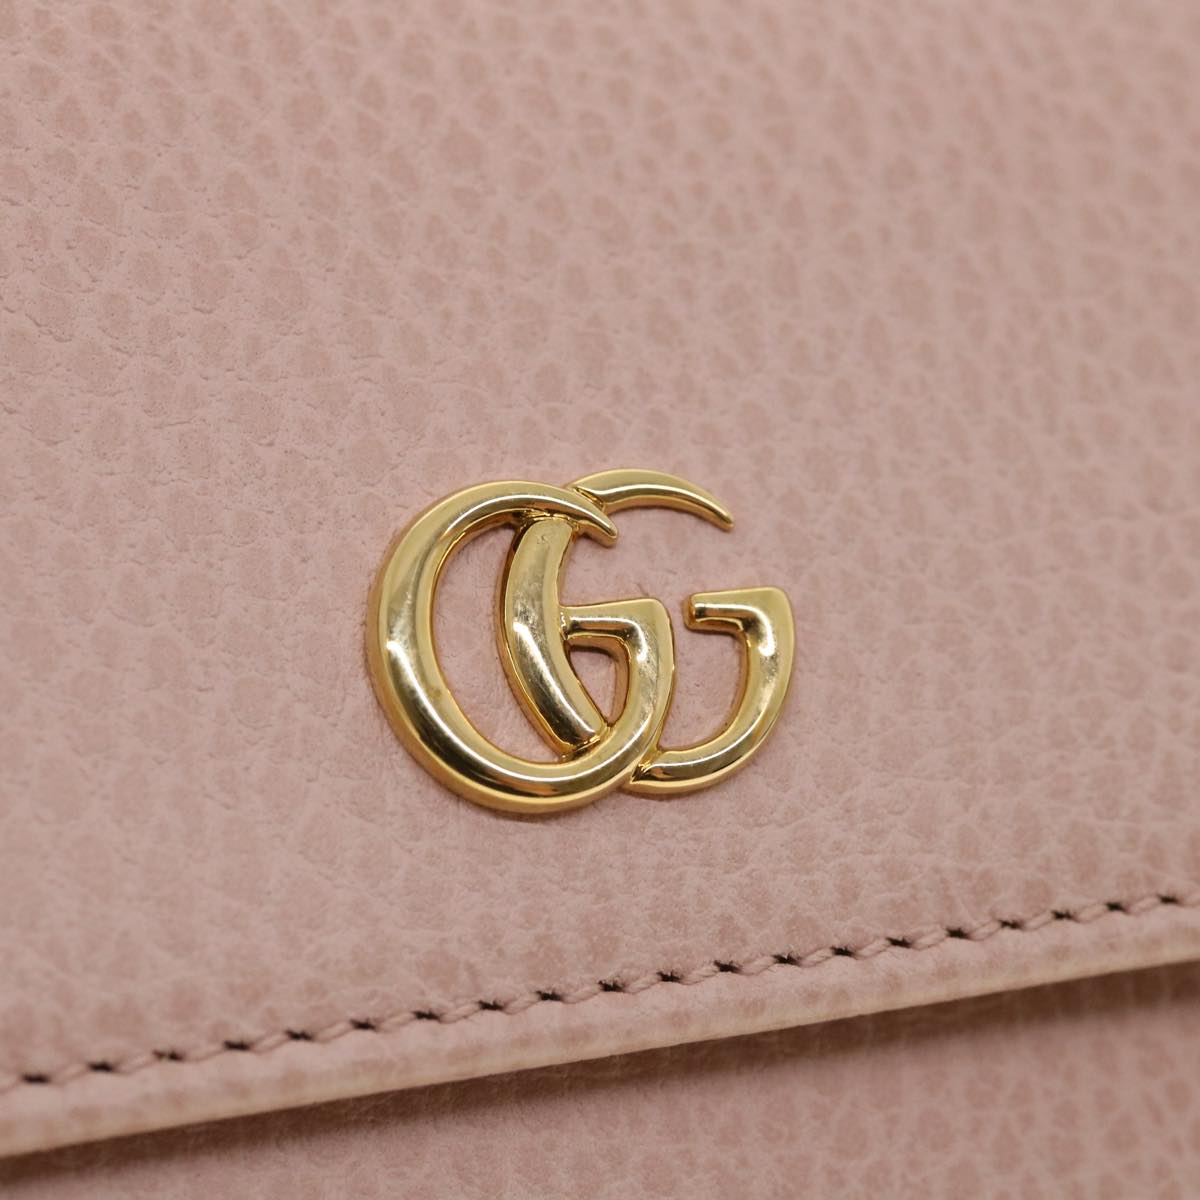 GUCCI GG Marmont Wallet Leather Pink 546584 Auth ki2633